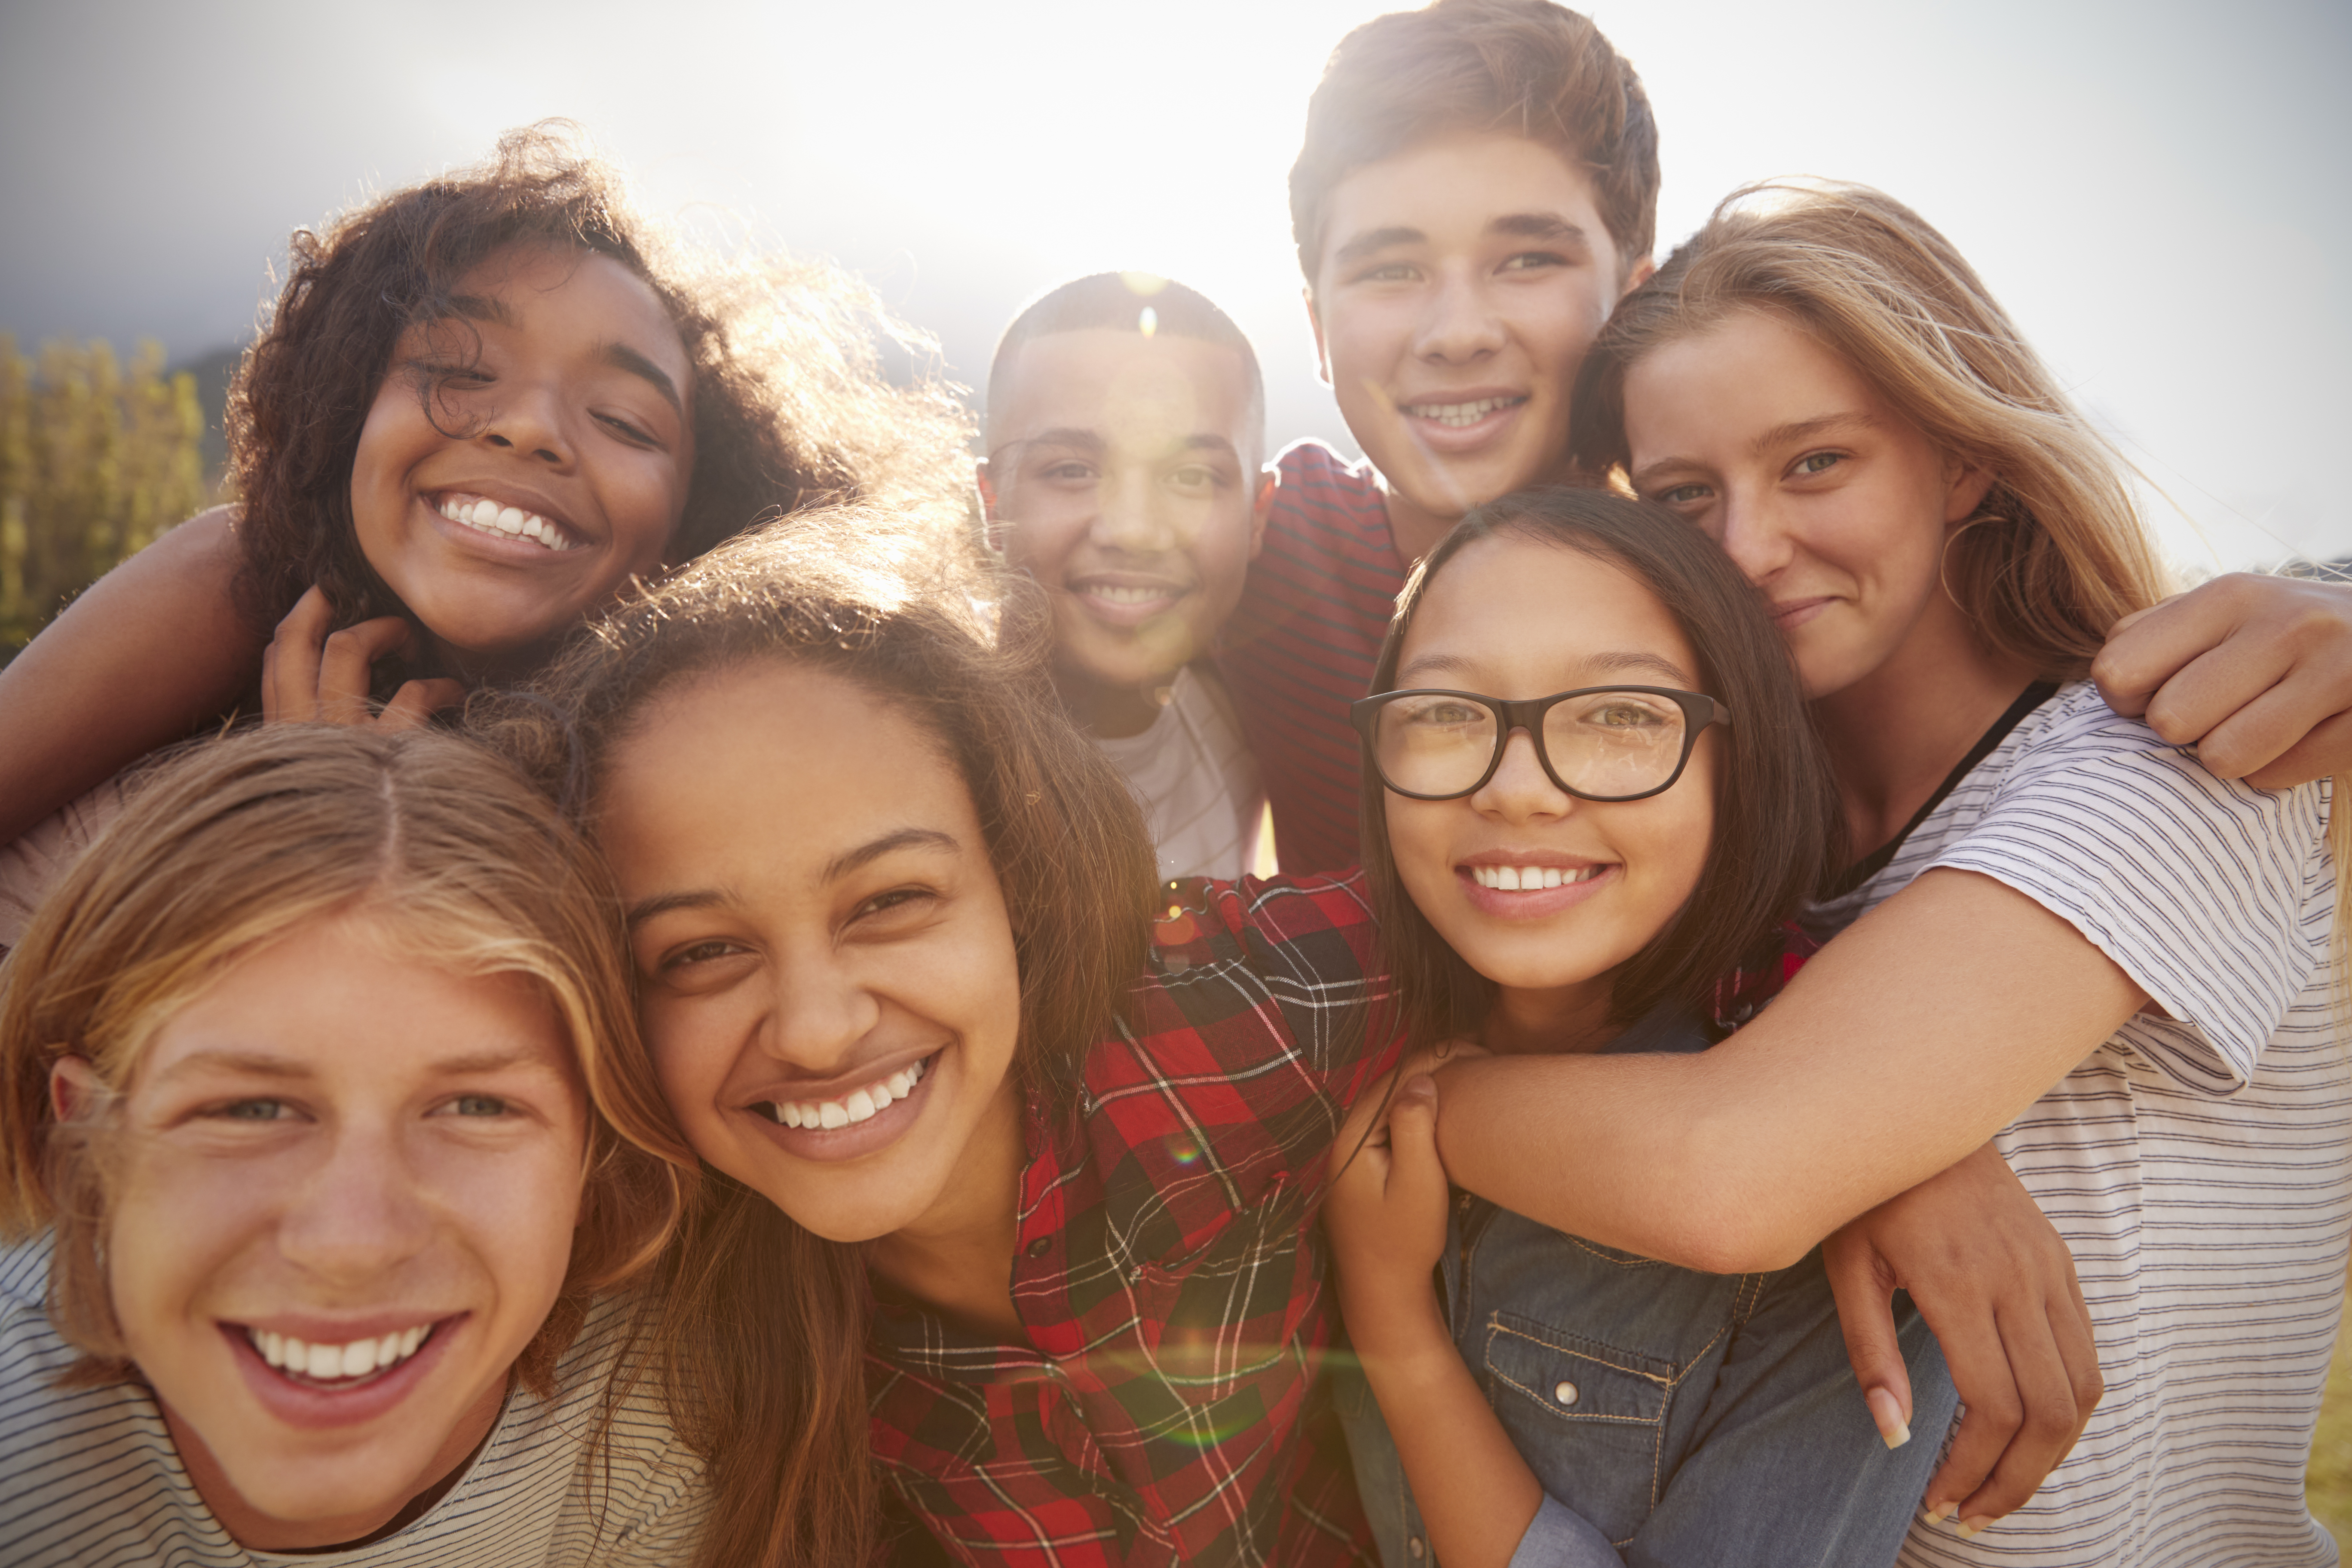 Close Friendships In Adolescence Predict Health In Adulthood